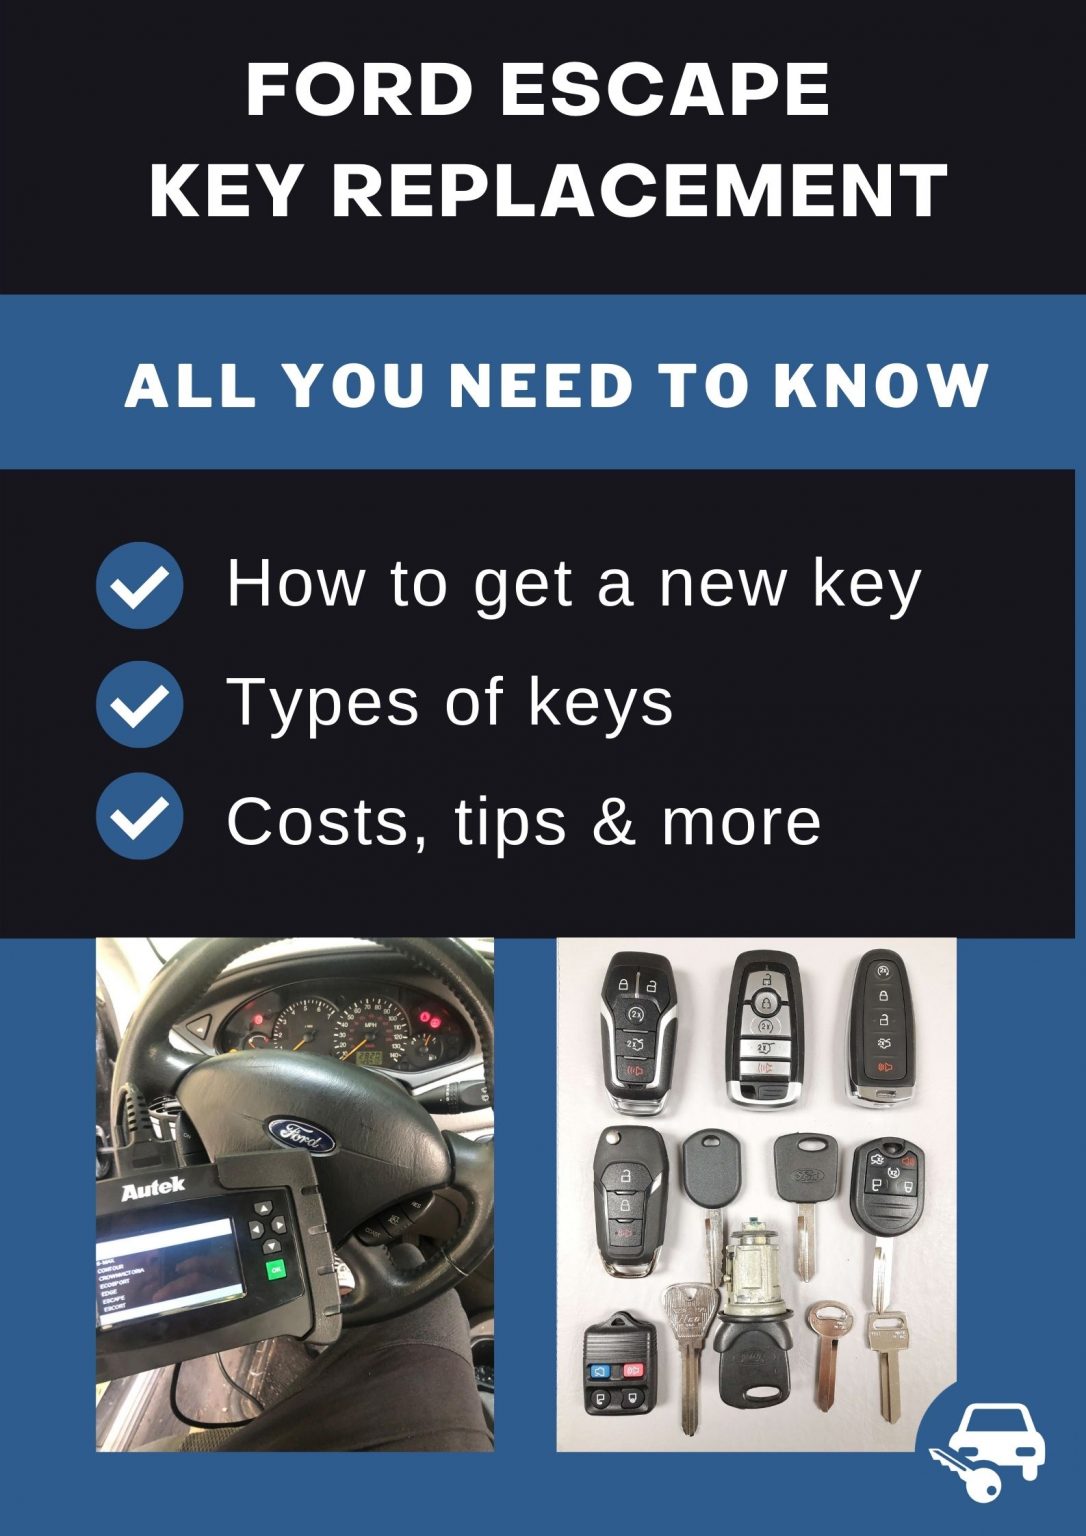 Ford Escape Key Replacement What To Do, Options, Costs & More